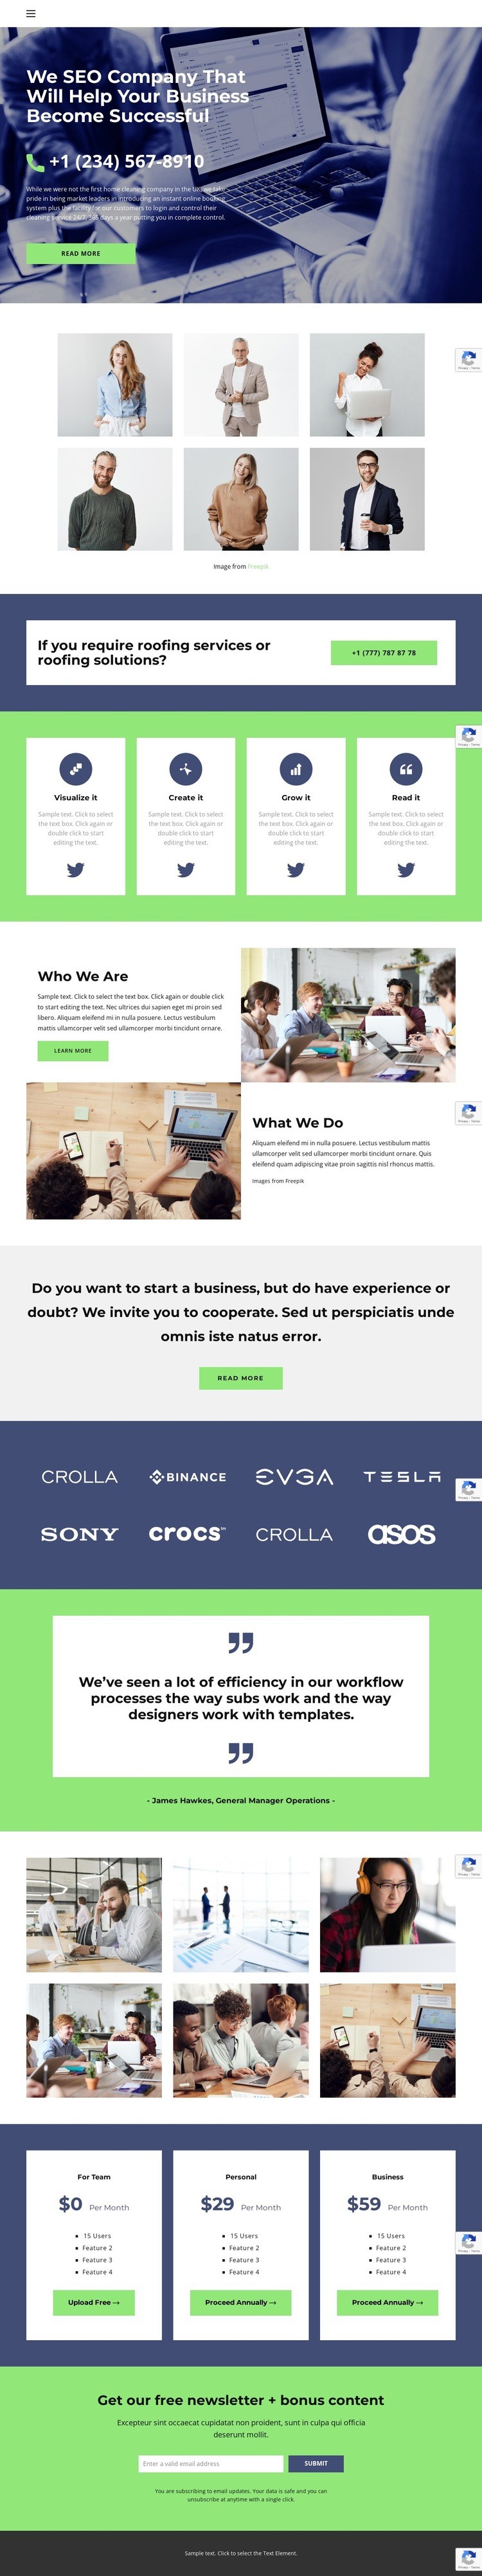 Business in crisis Web Page Designer